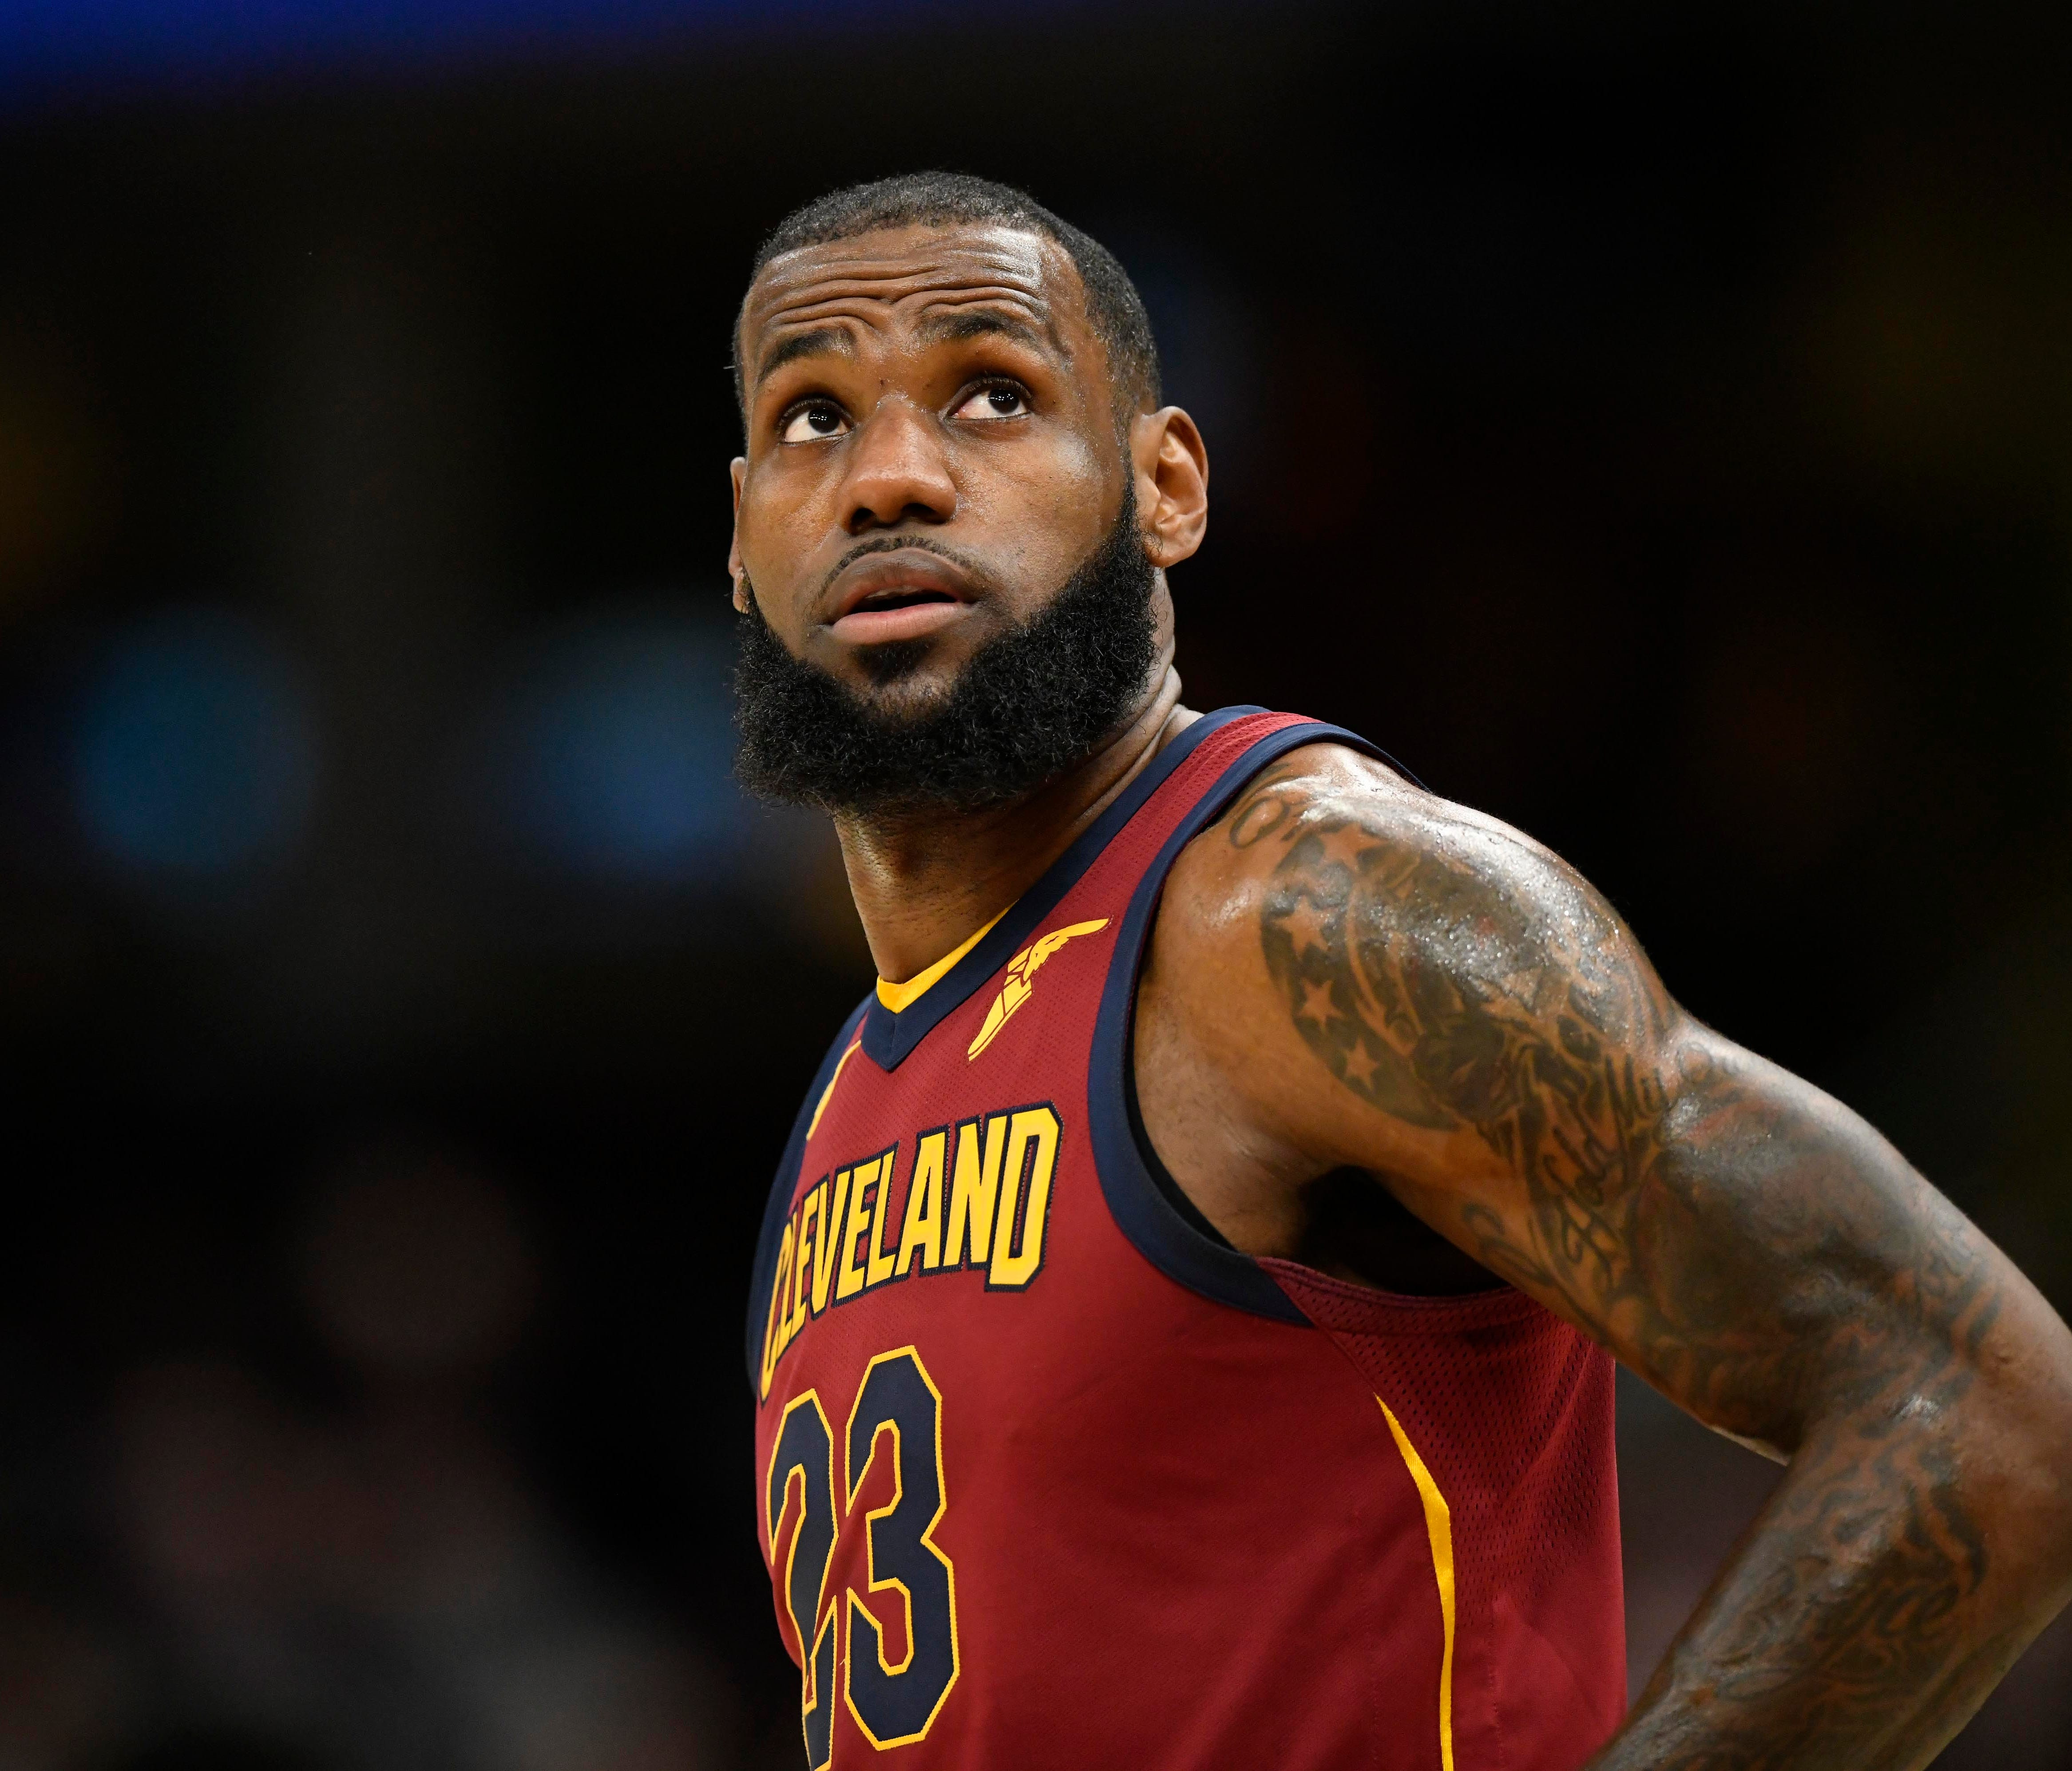 Cleveland Cavaliers forward LeBron James reacts in the first quarter against the Brooklyn Nets.